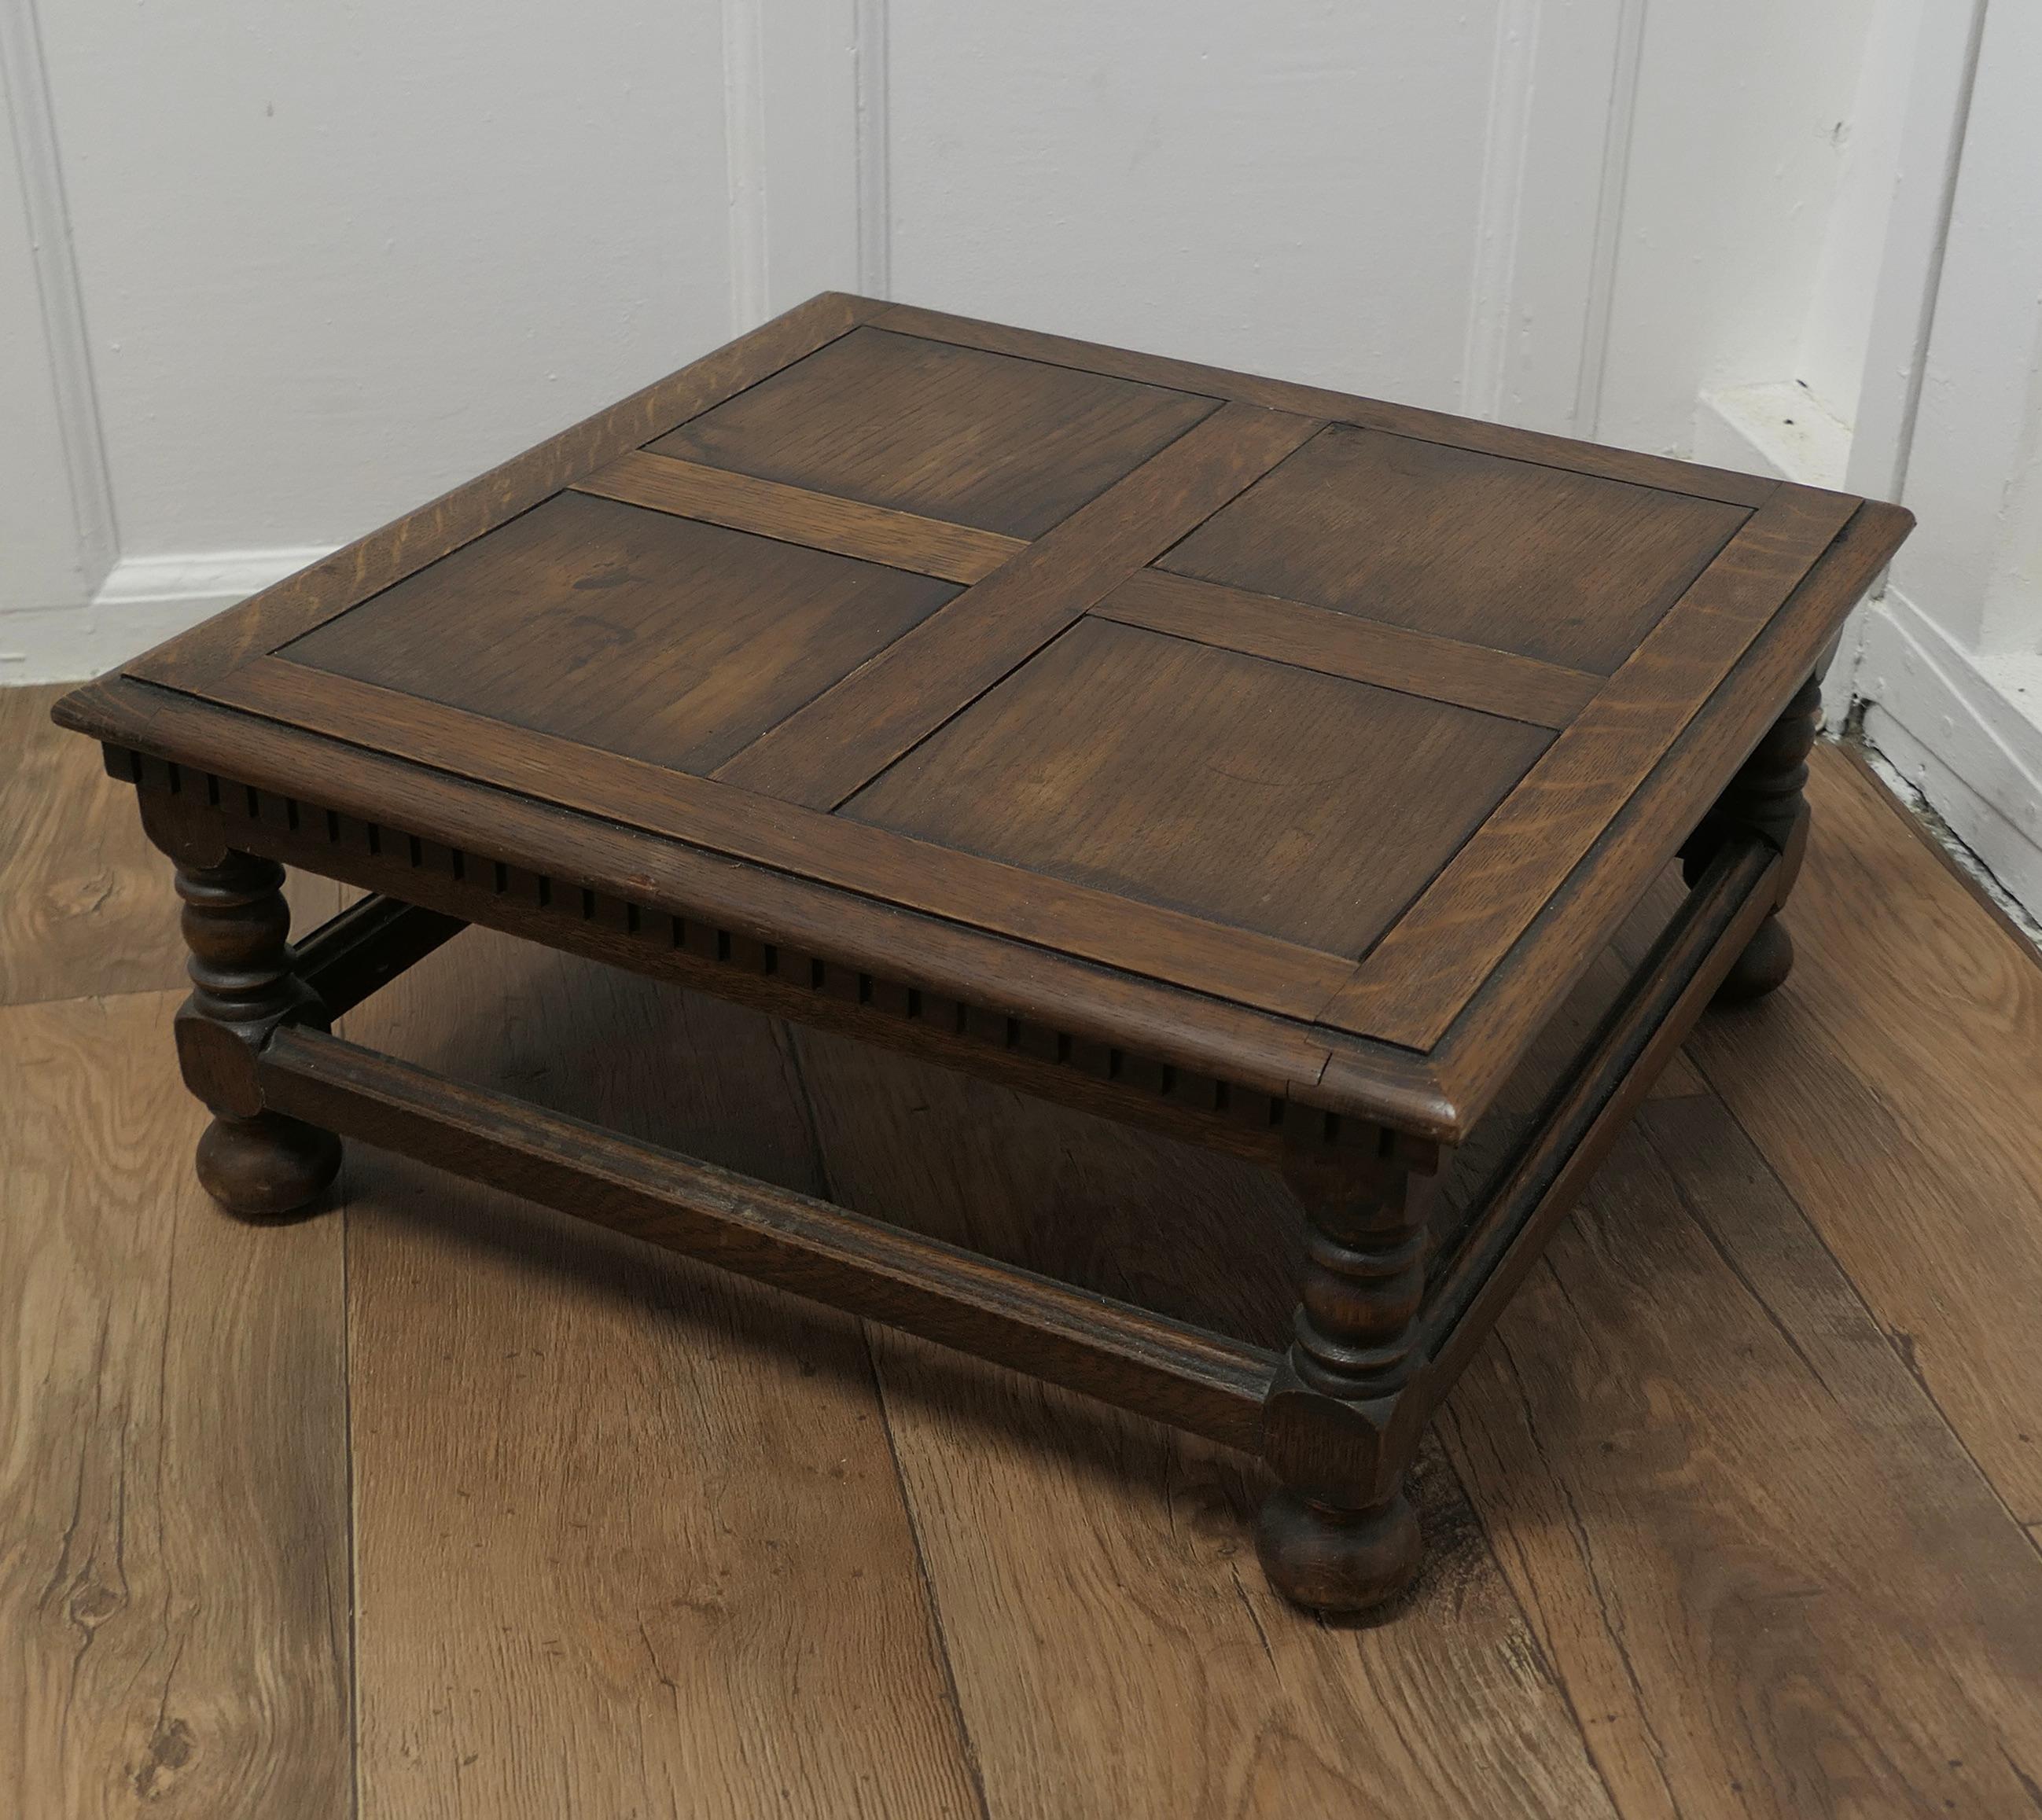 panelled coffee table